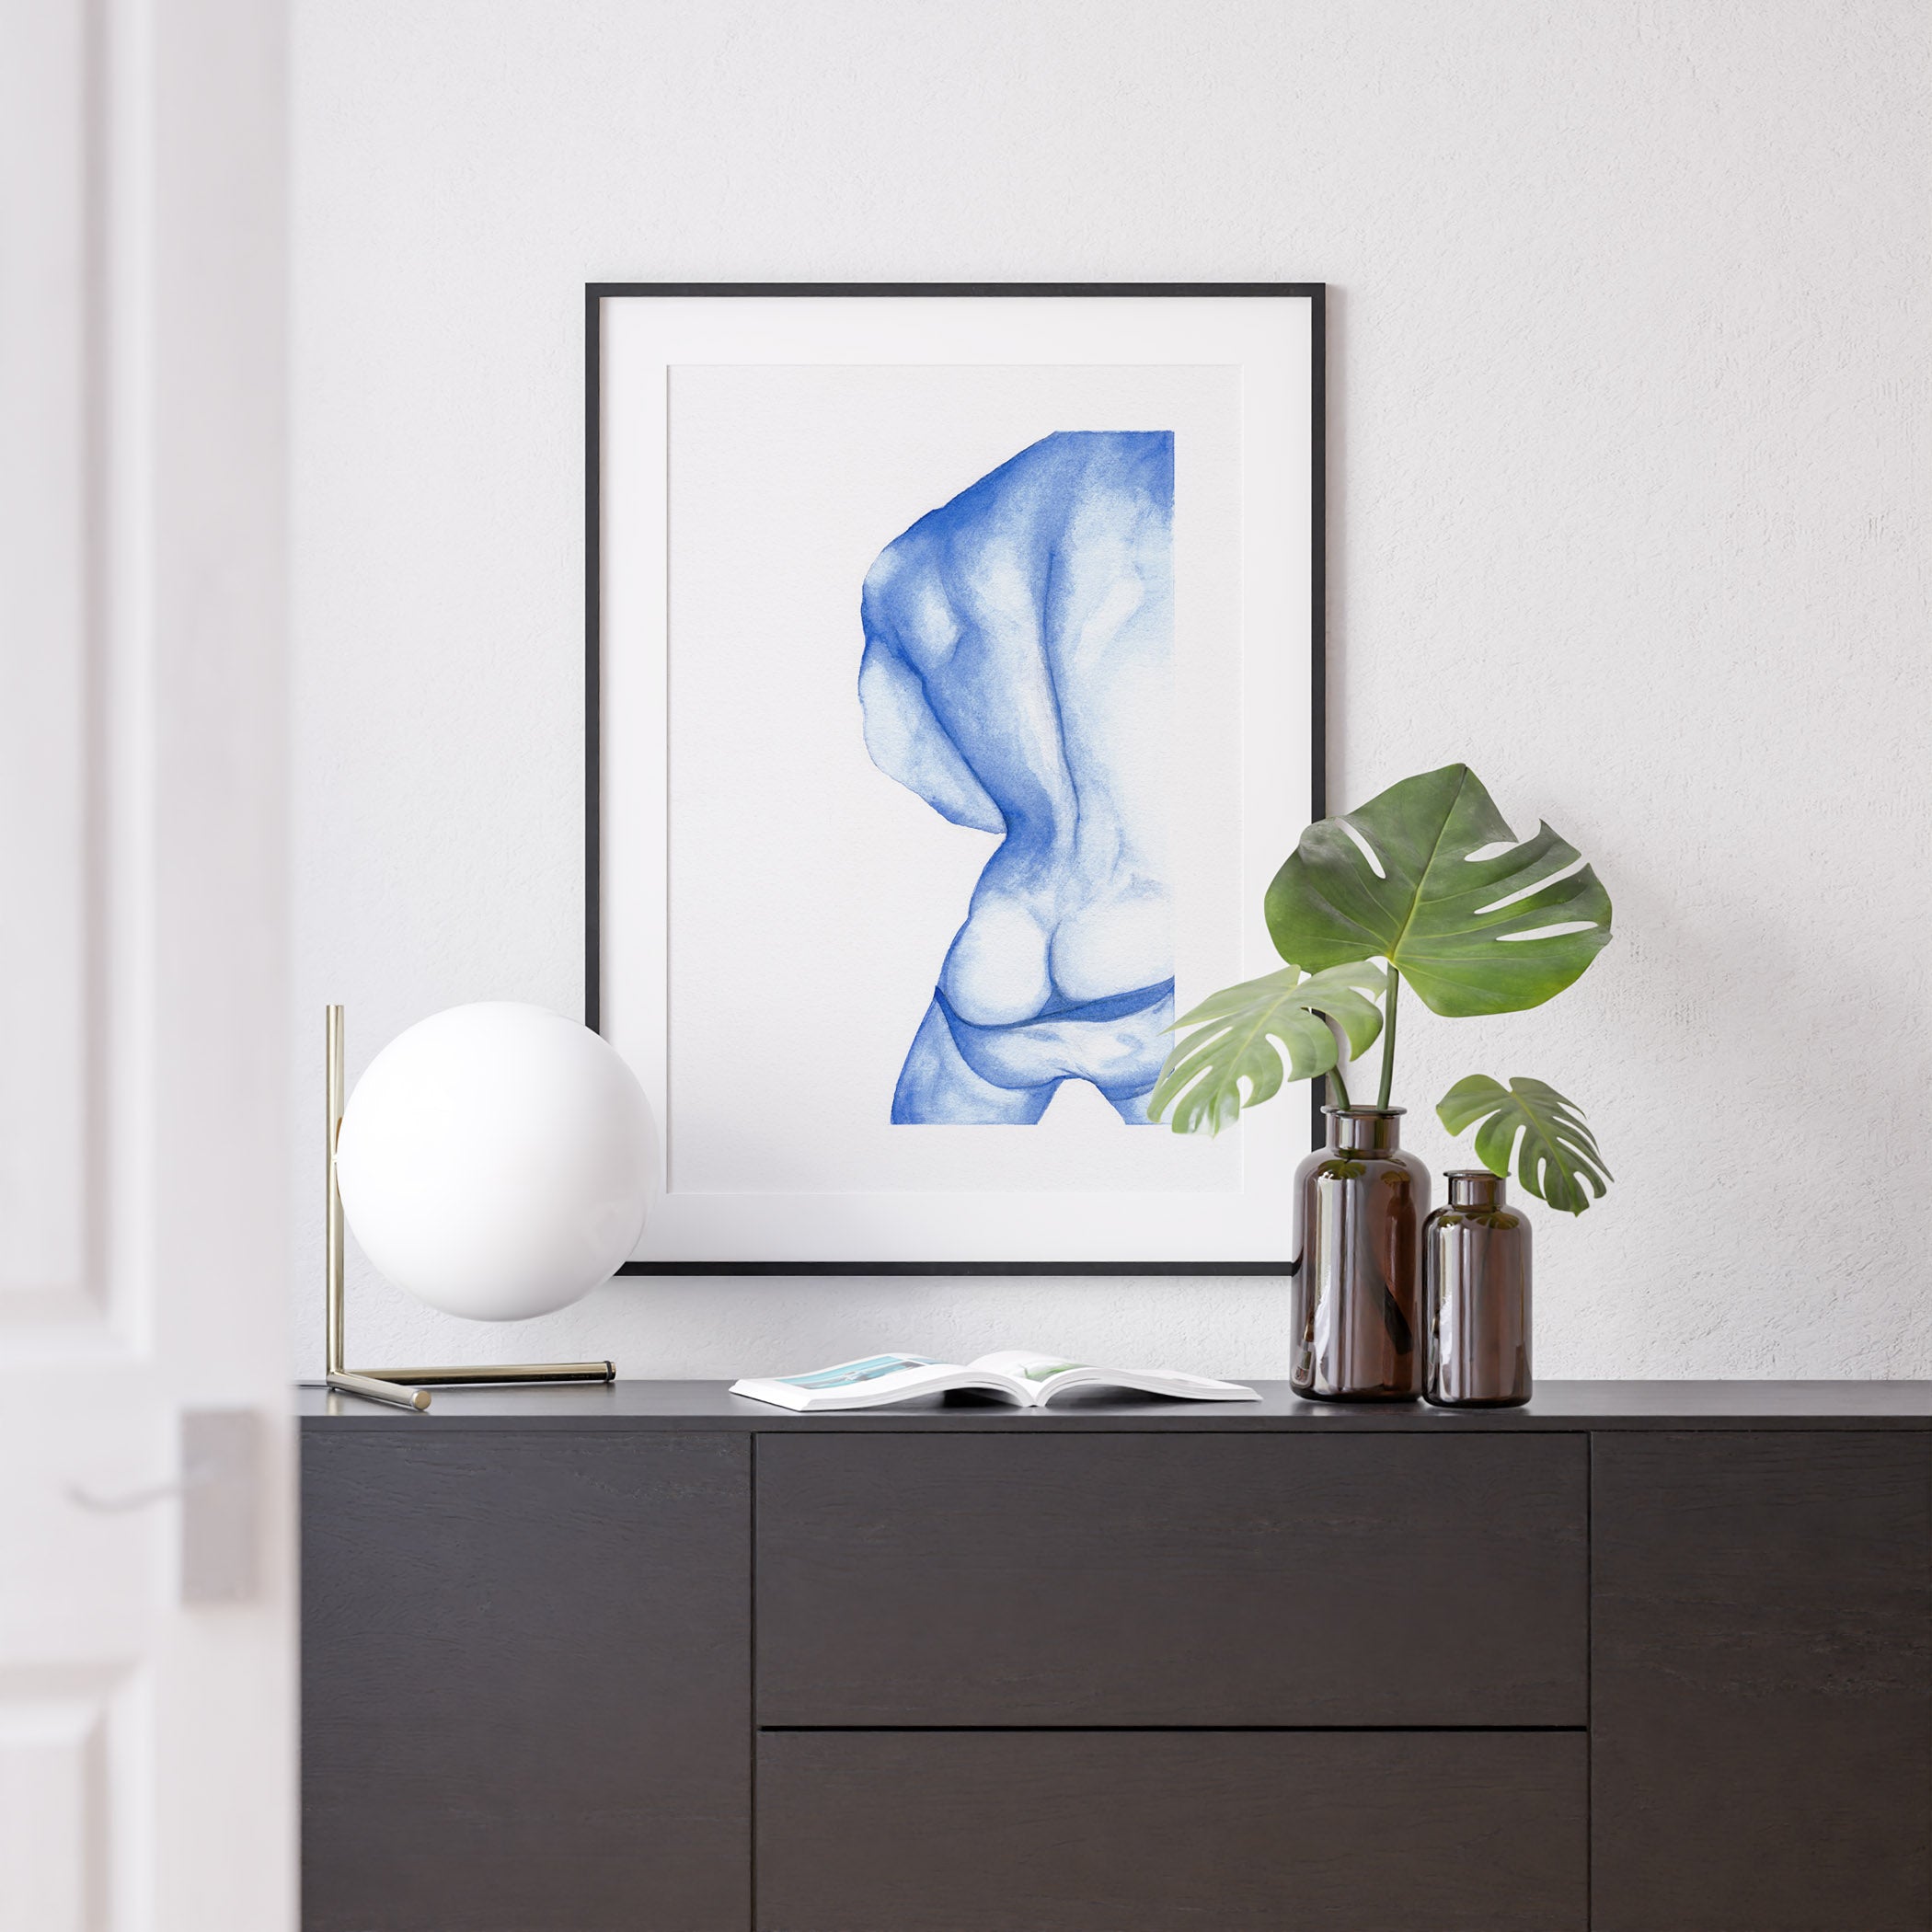 A watercolor print of a nude male body from behind